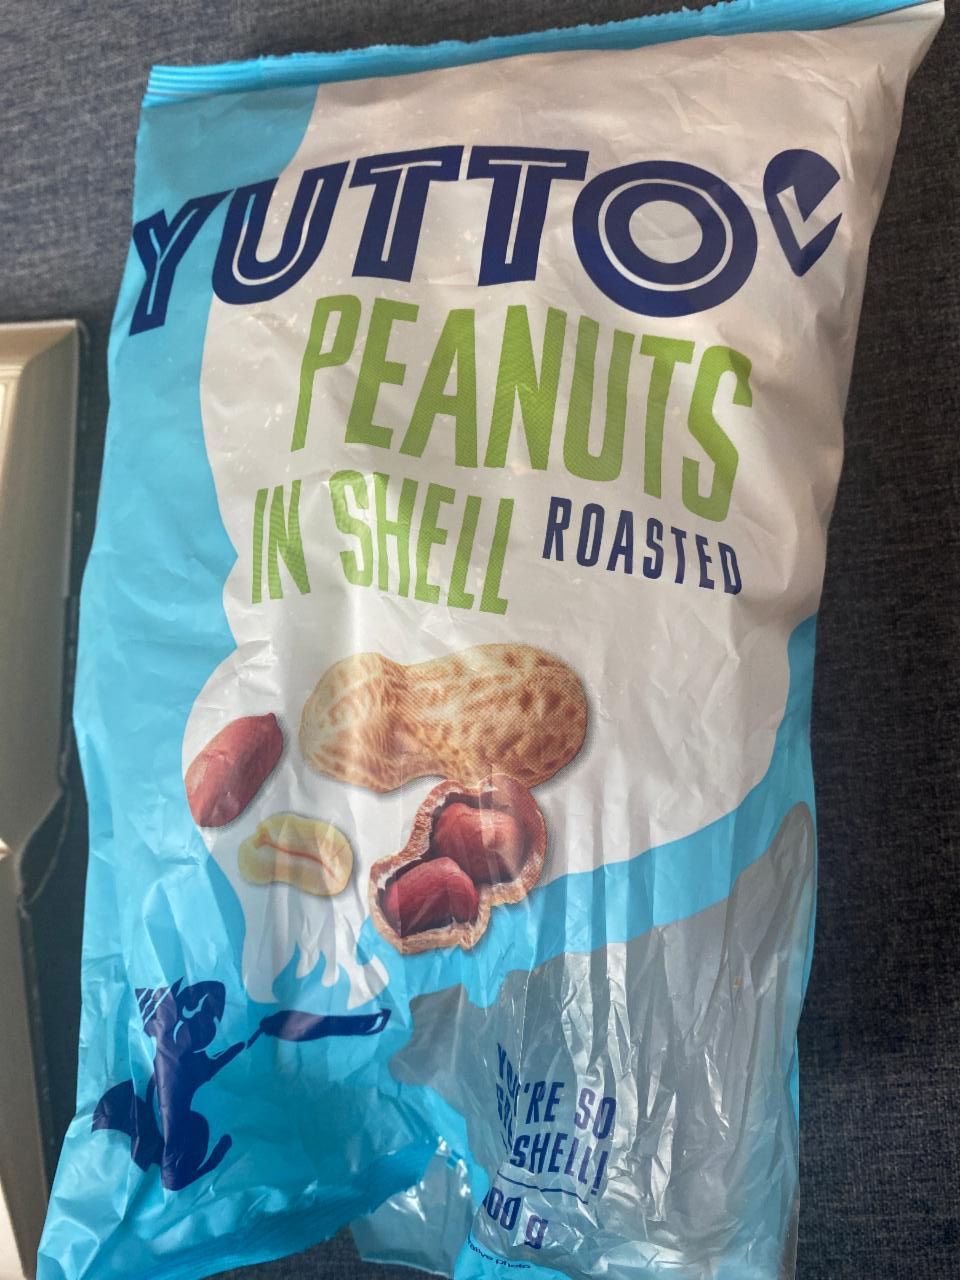 Fotografie - Peanuts in shell roasted Yutto